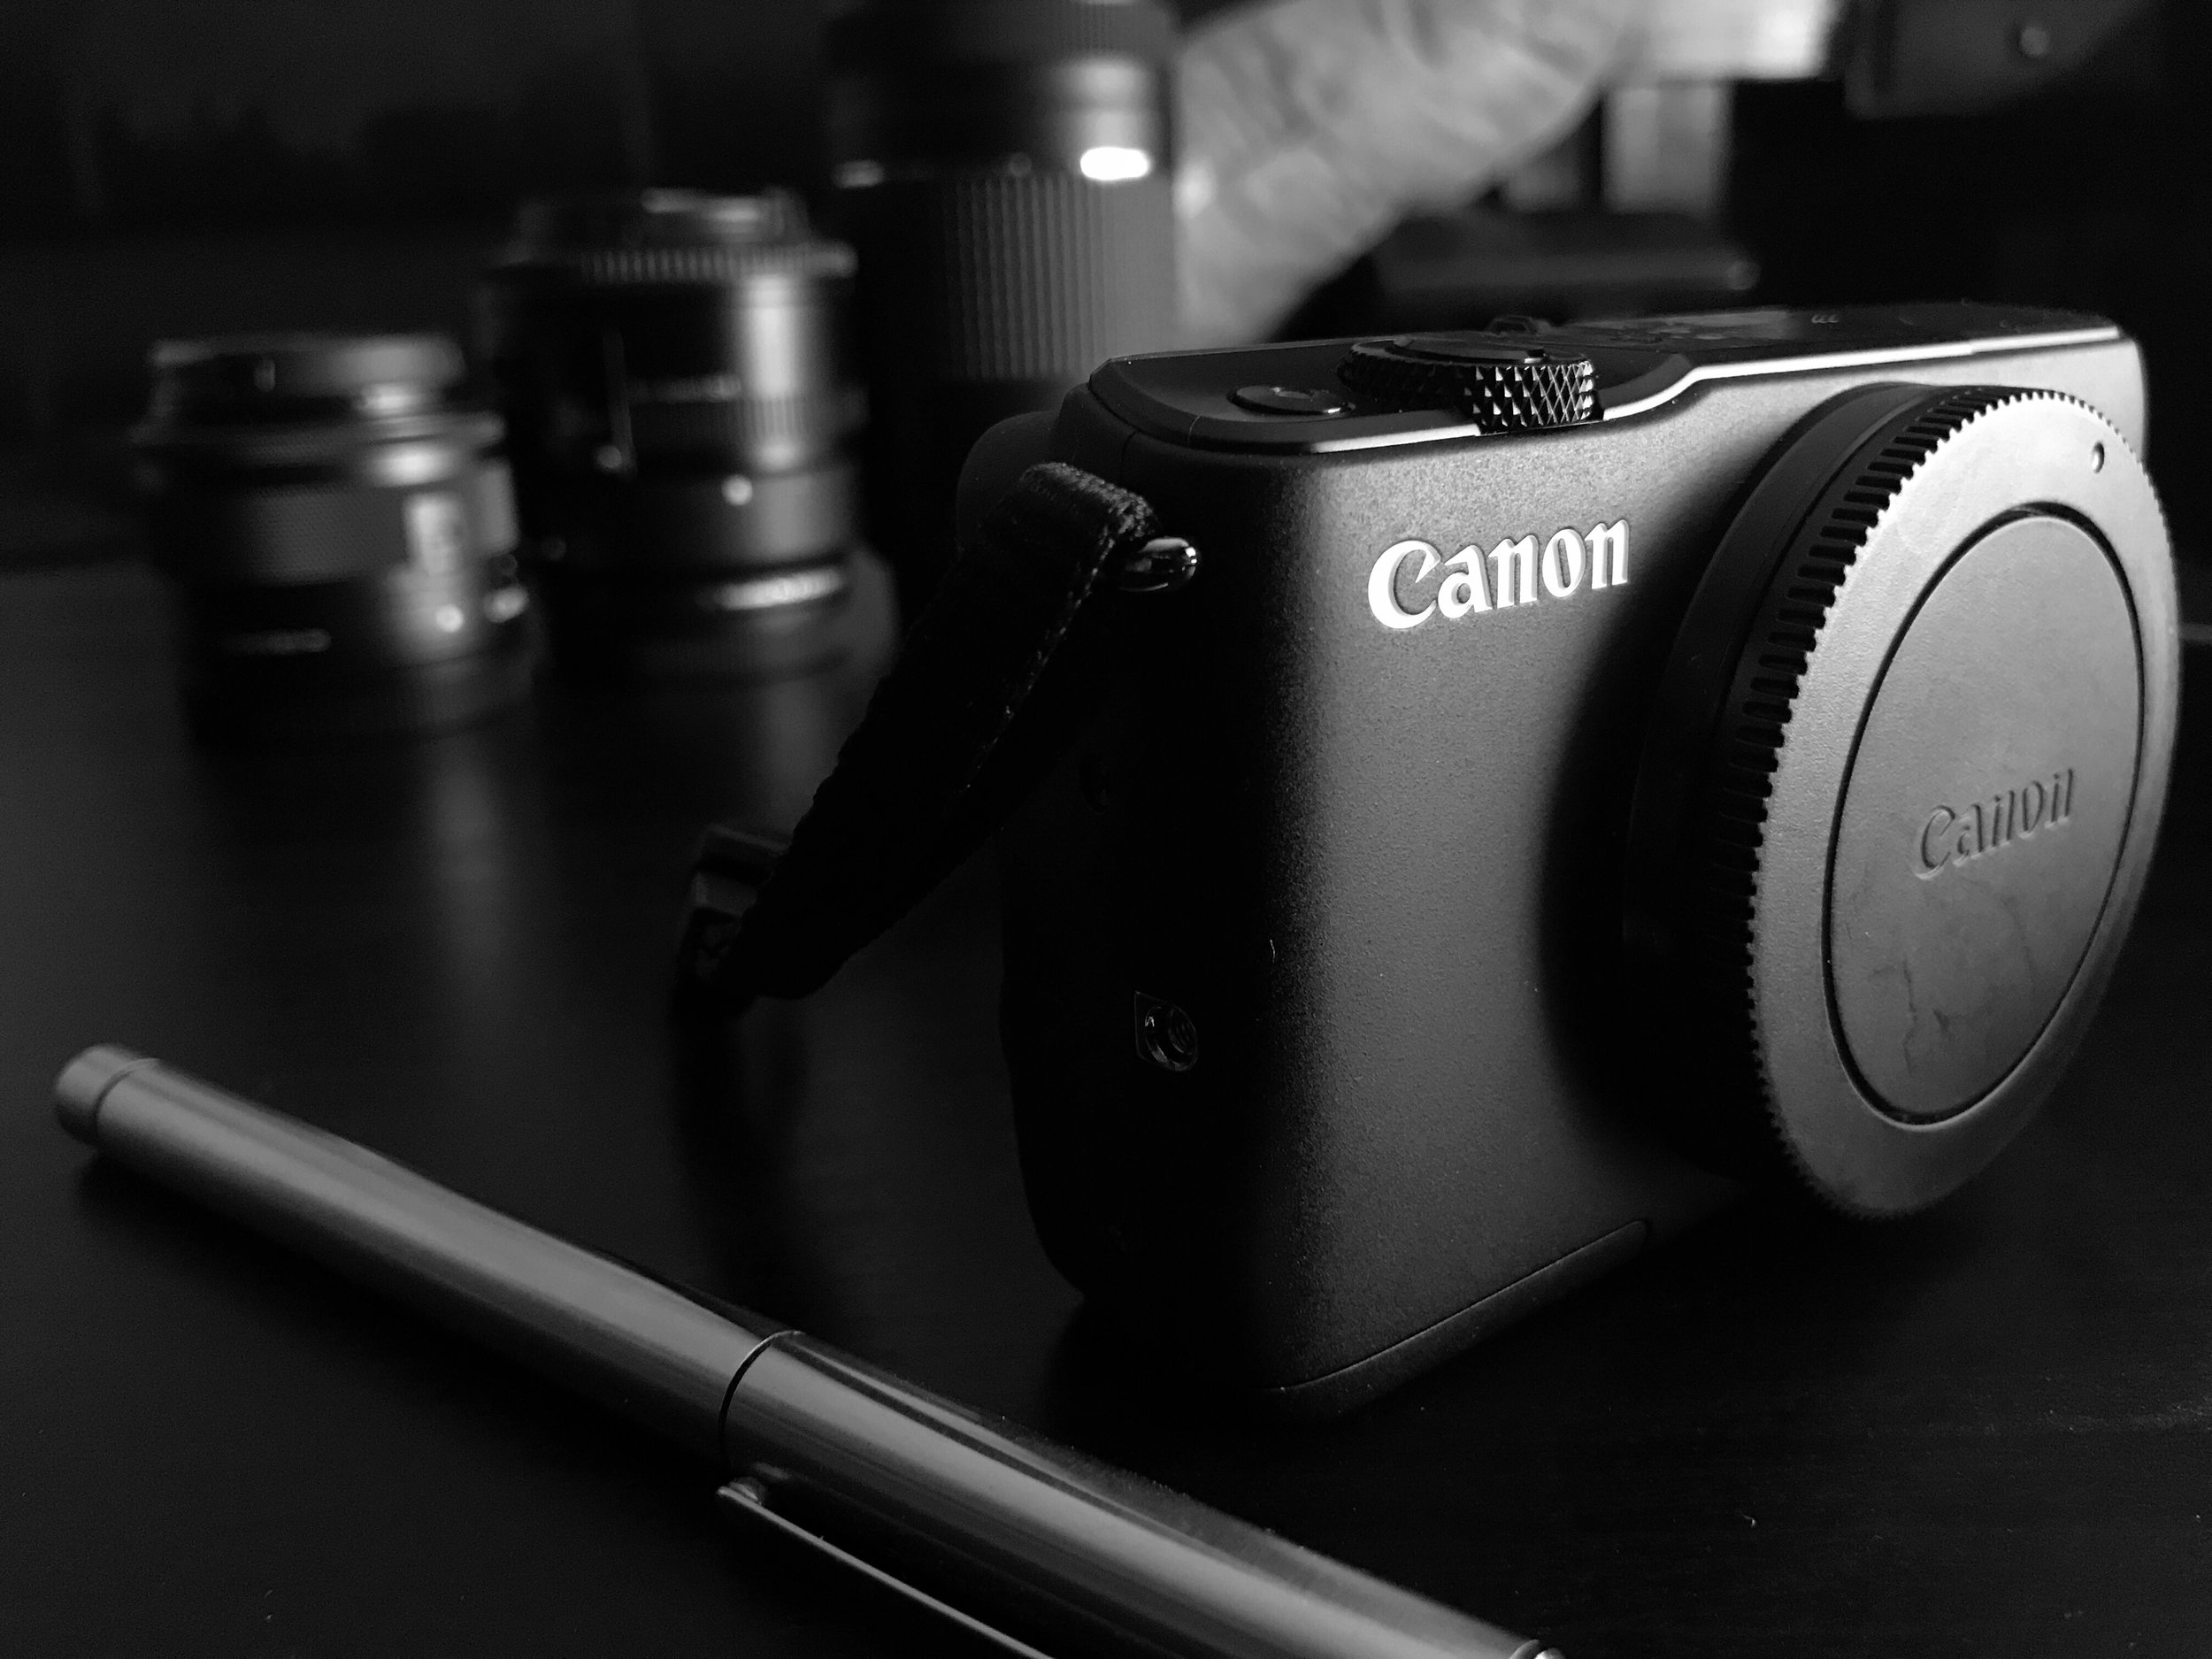 Canon EOS M10 review: A very capable travel camera just got more